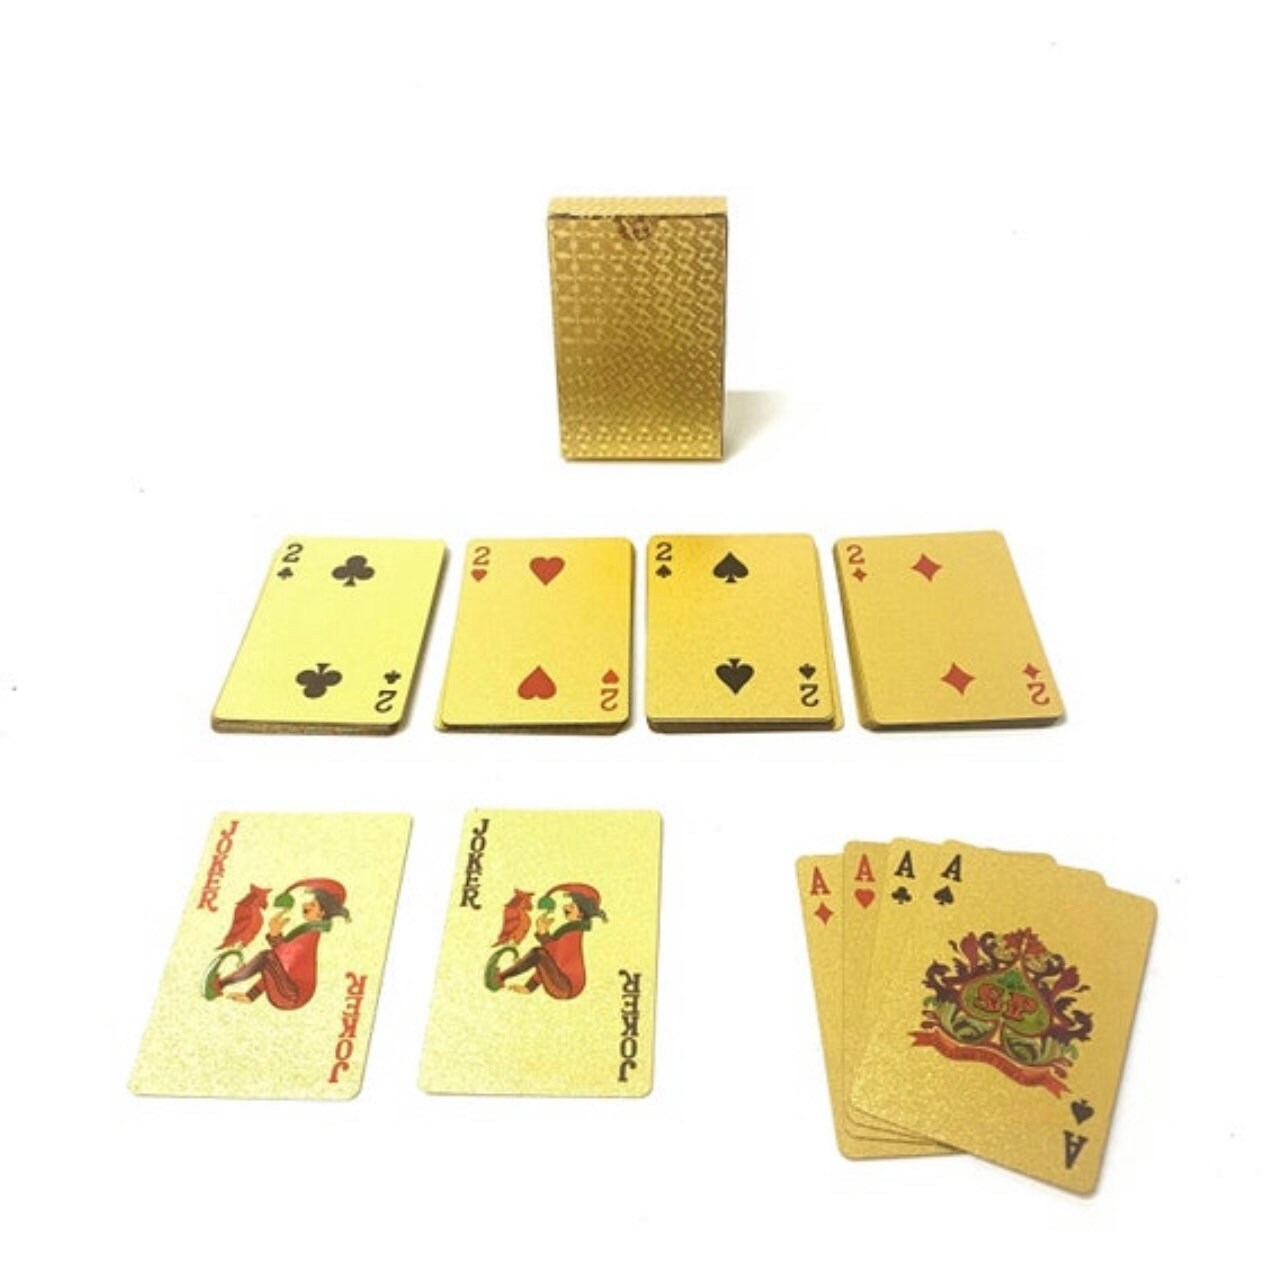 216 Blank Playing Cards With 4 Blank Tuck Boxes to Write on With Playing  Cards Finish Poker Size 